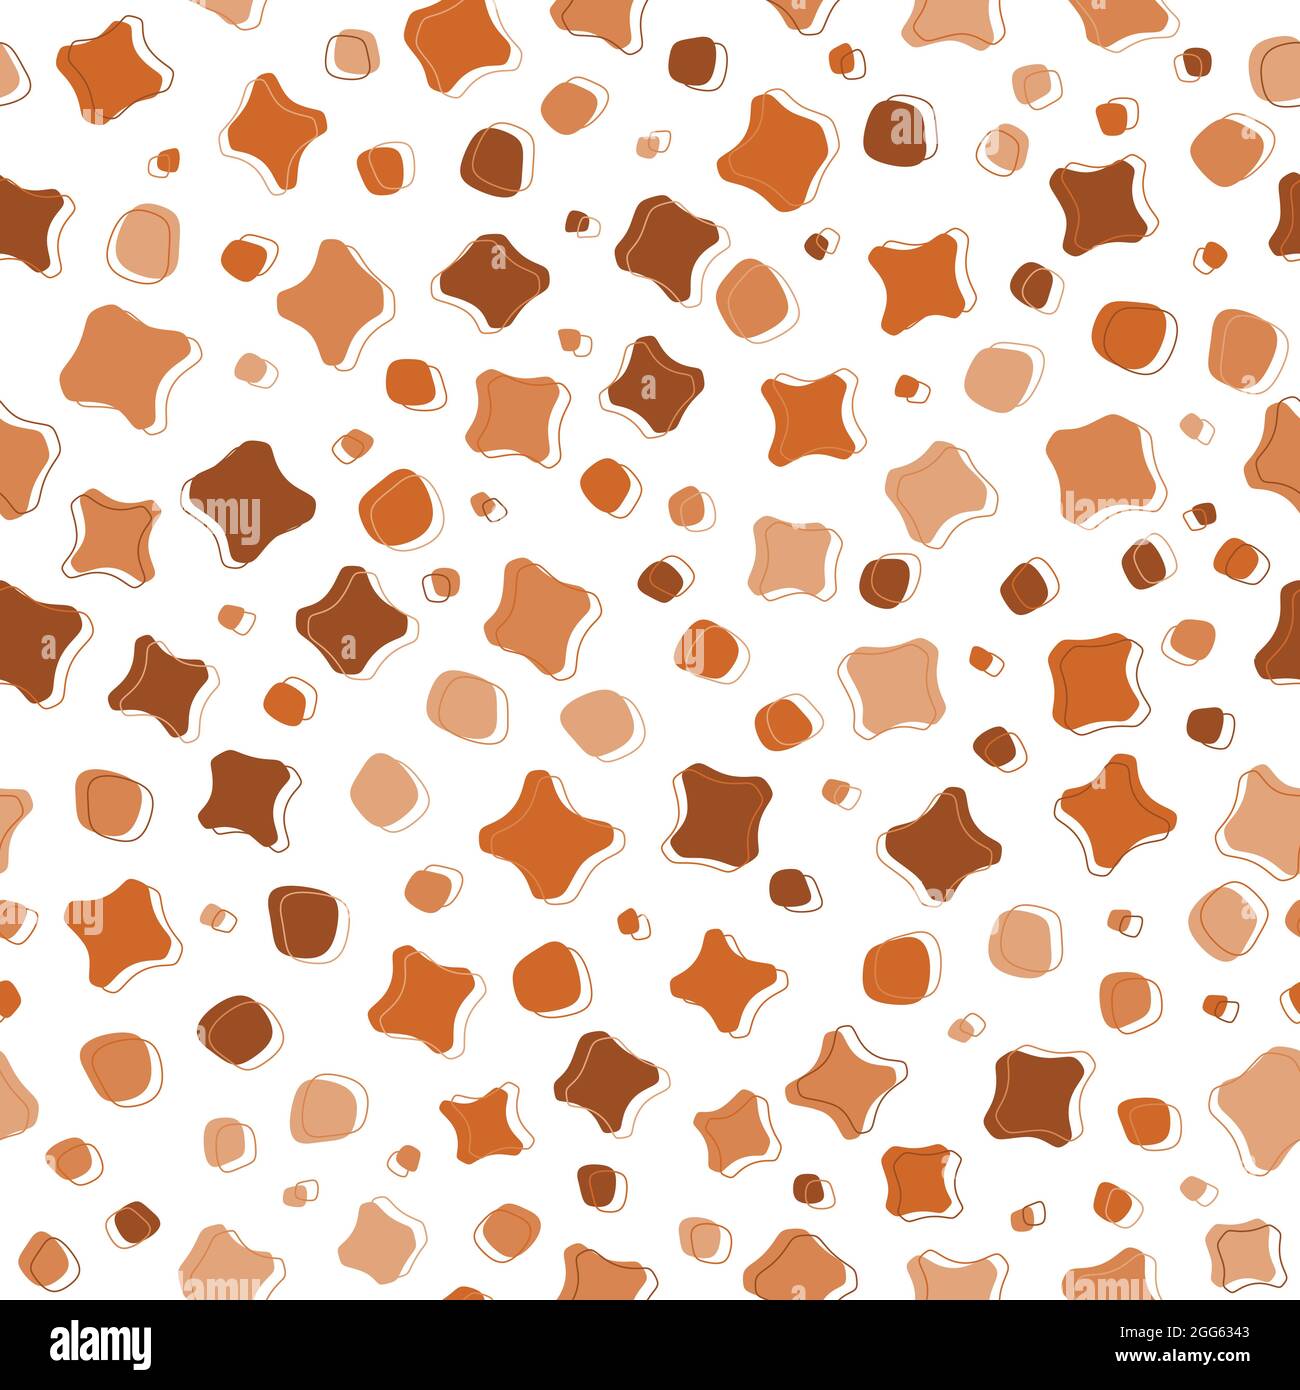 Abstract brown organic shape seamless pattern background Stock Vector